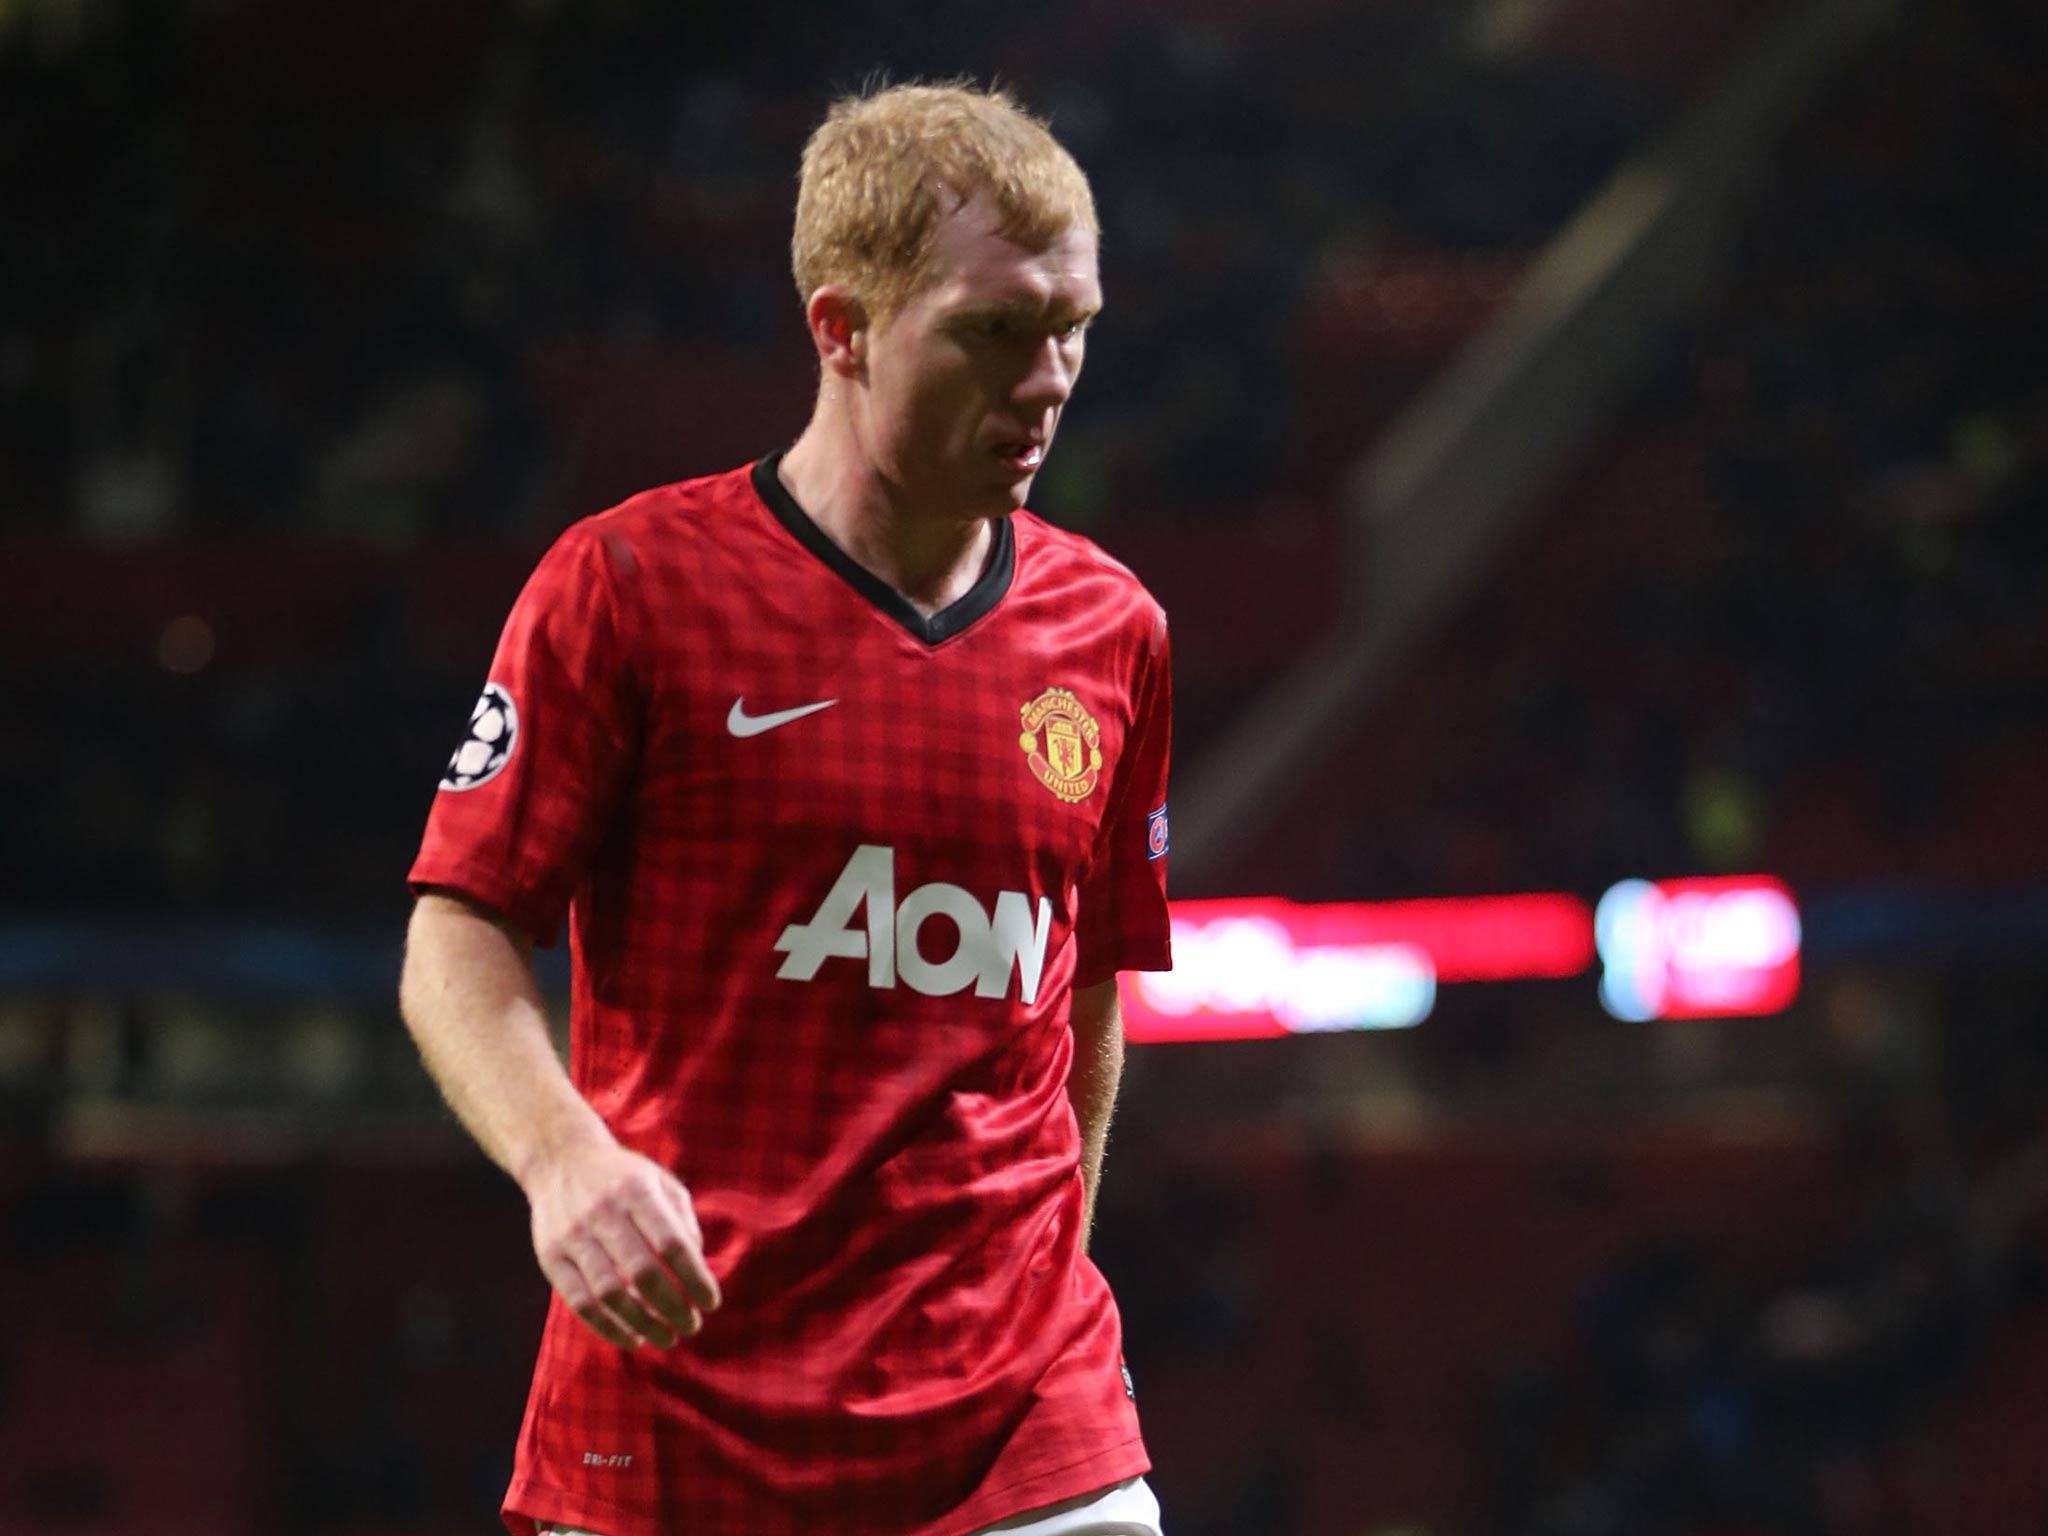 Paul Scholes in action for Manchester United last season